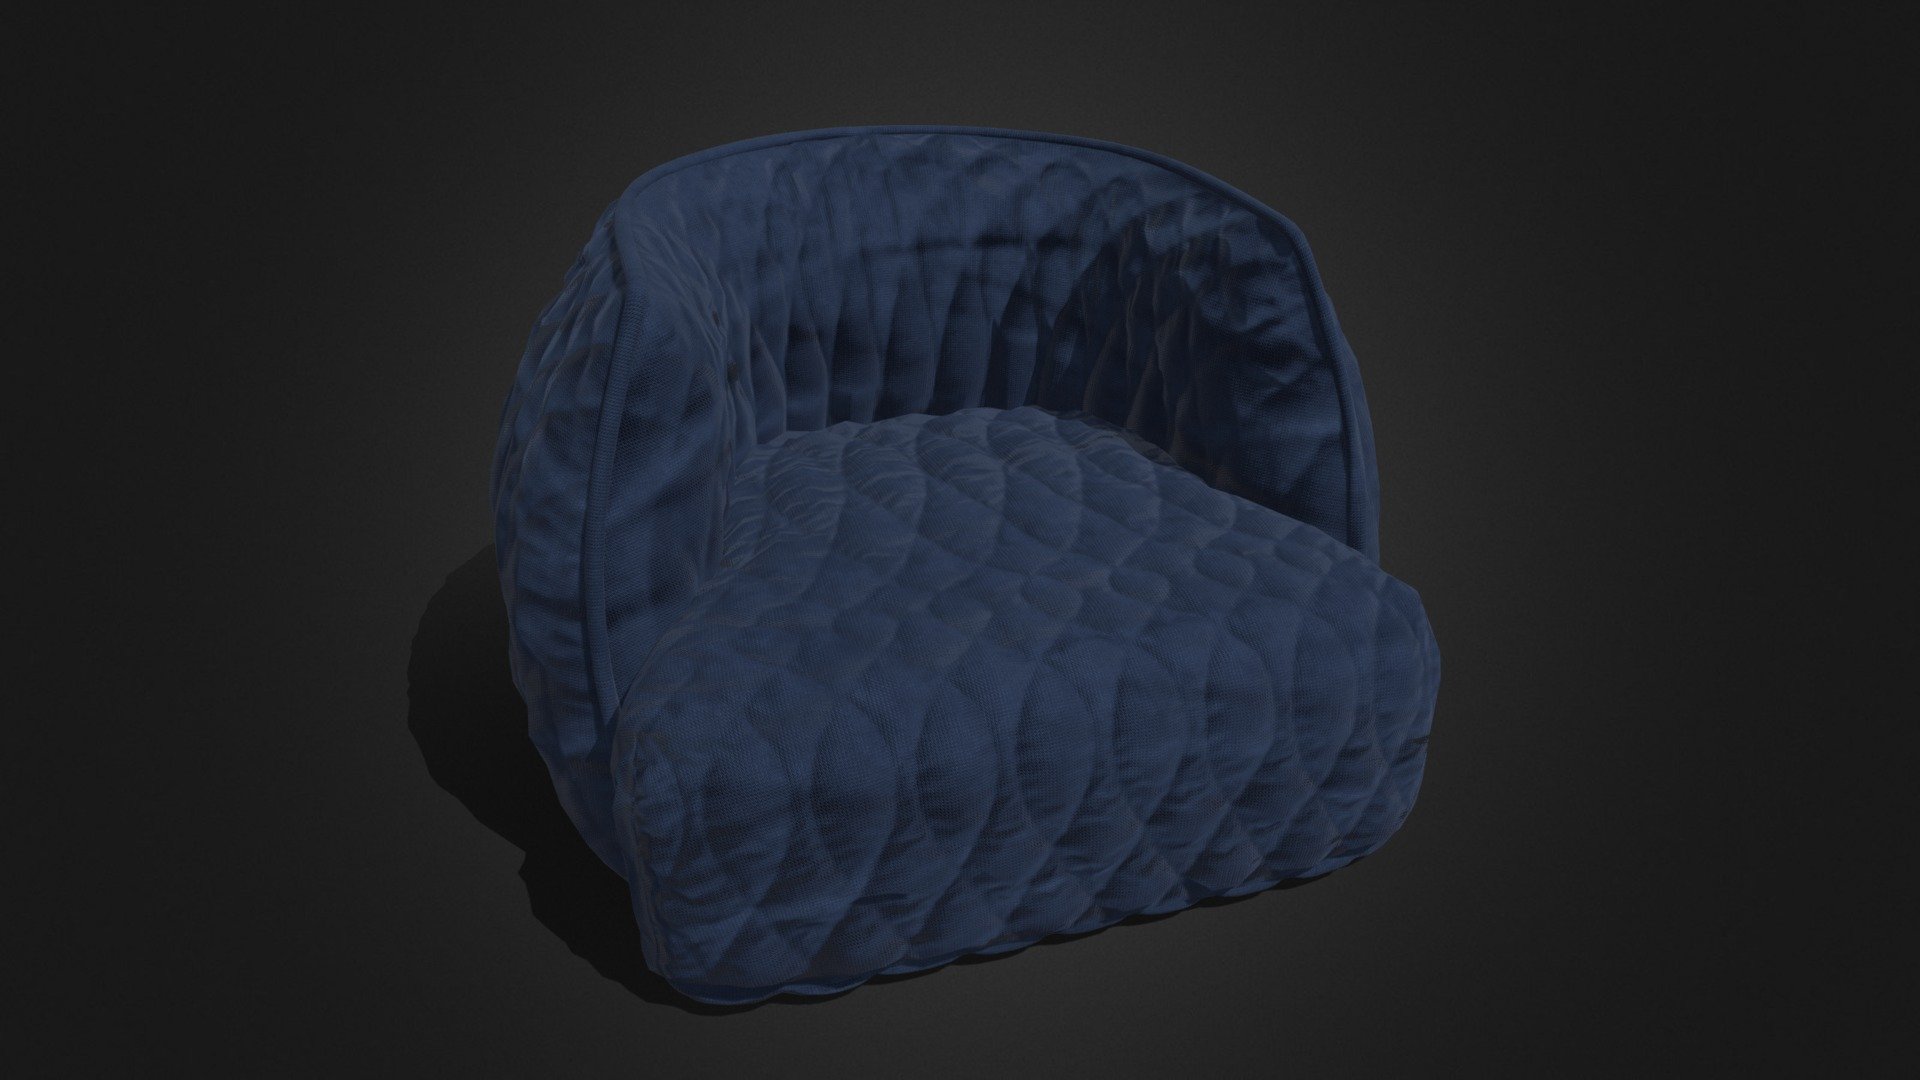 3d model of a Redondo Armchair. 




This product is made in Blender and ready to render in Cycle. Unit setup is metres and the models are scaled to match real life objects. 




The model comes with textures and materials and is positioned in the center of the coordinates system.




No additional plugin is needed to open the model.




Notes:




Geometry: Polygonal




Textures: Yes 




Rigged: No




Animated: No




UV Mapped: Yes




Unwrapped UVs: Yes, non-overlapping




Bake normal map




Note: don't forget to take a few seconds to rate this product, your support will allow me to continue working .



Thanks in advance for your help and happy blending!




Hope you like it! Thank you!

My youtube channel : https://www.youtube.com/toss90 - Redondo Armchair - 3D model by Toss90 3d model